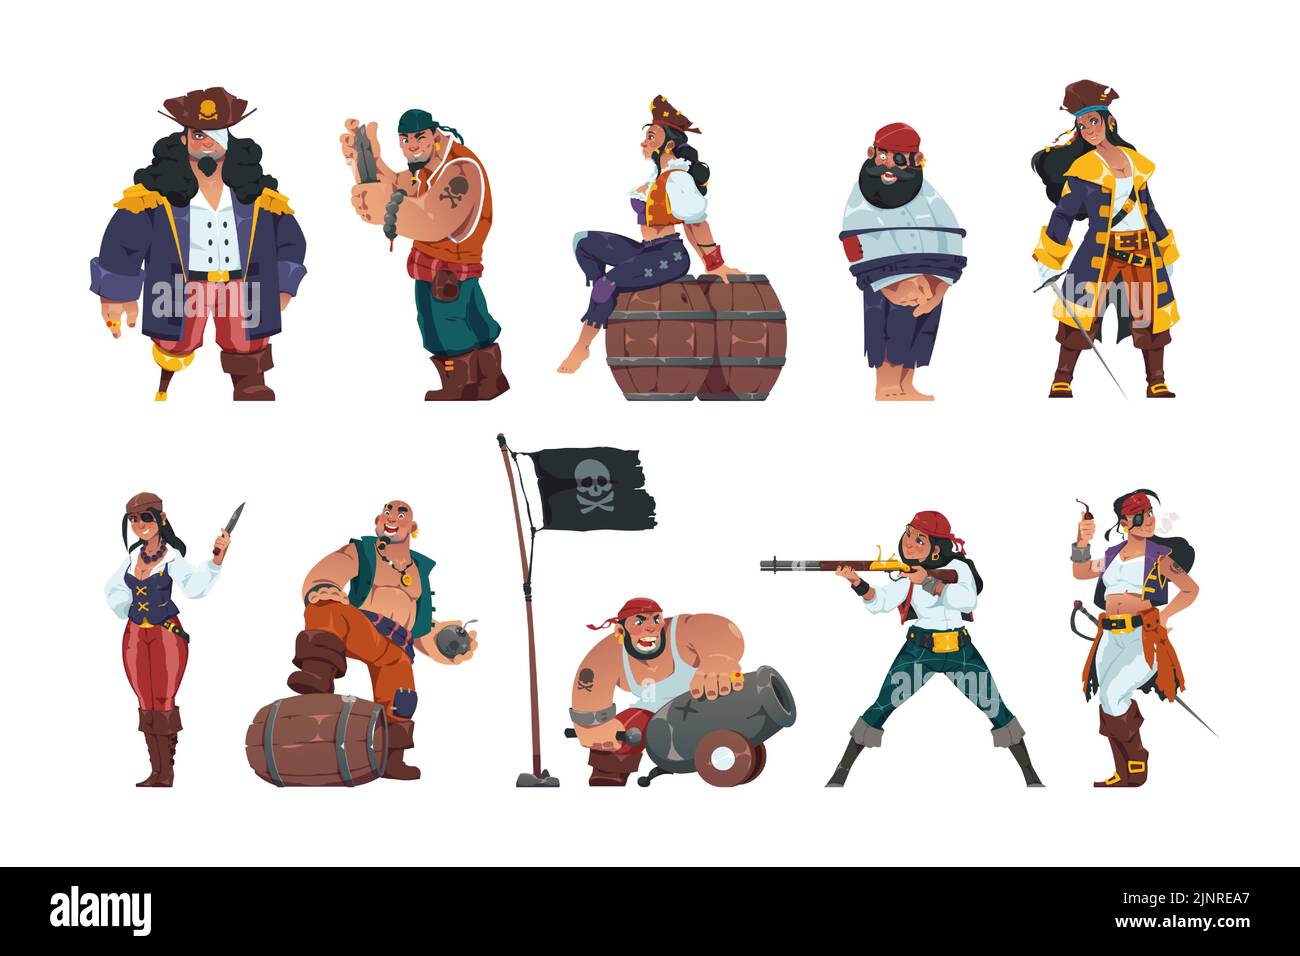 Pirate men and women. Cartoon fantasy sailors and sea warriors with swords treasure chest spyglass wearing hats and pirate costumes. Vector marine Stock Vector